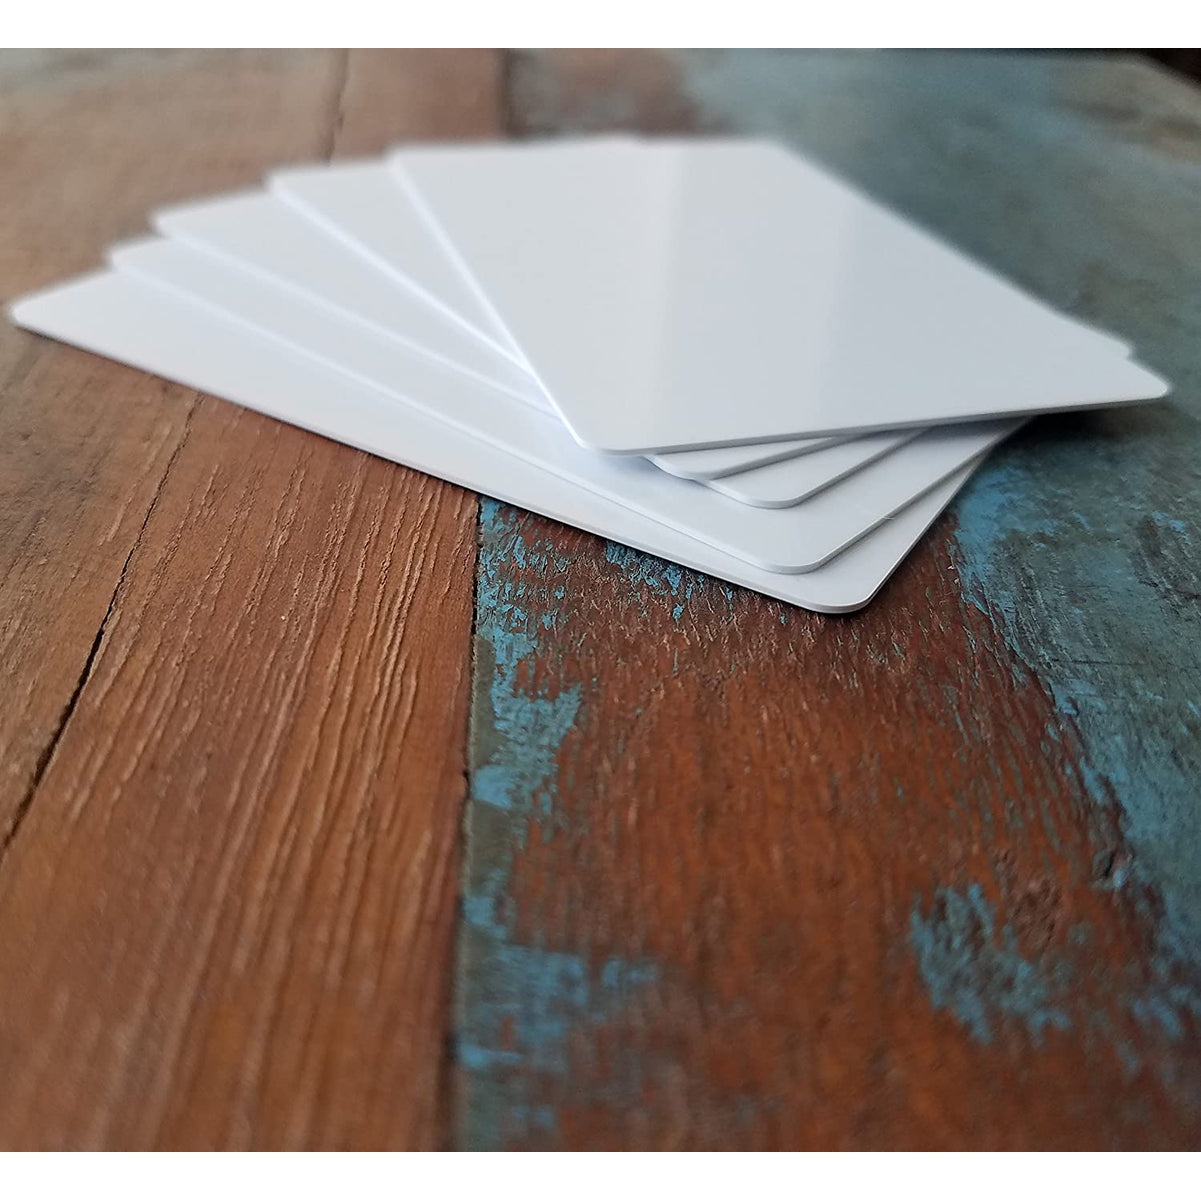 A stack of five Premium Blank PVC Cards for ID Badge Printers - Graphic Quality CR80 30 Mil (CR80) is placed on a rustic wooden surface with a mix of brown and blue paint.